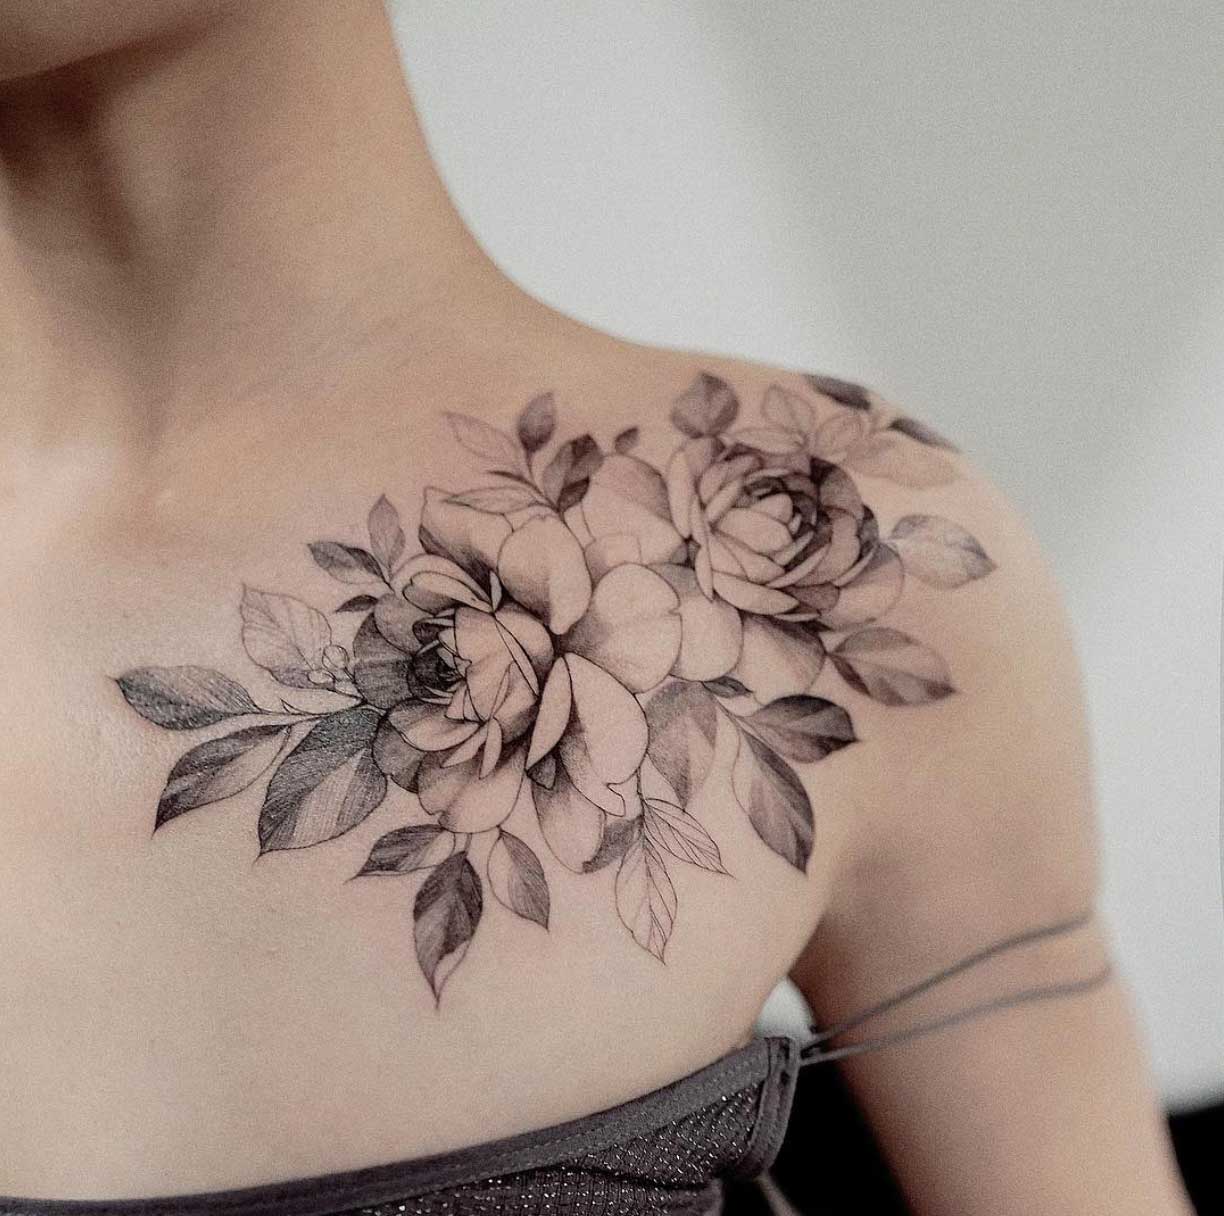 Behold, 80 Tattoos Every Girl Needs to See - TattooBlend